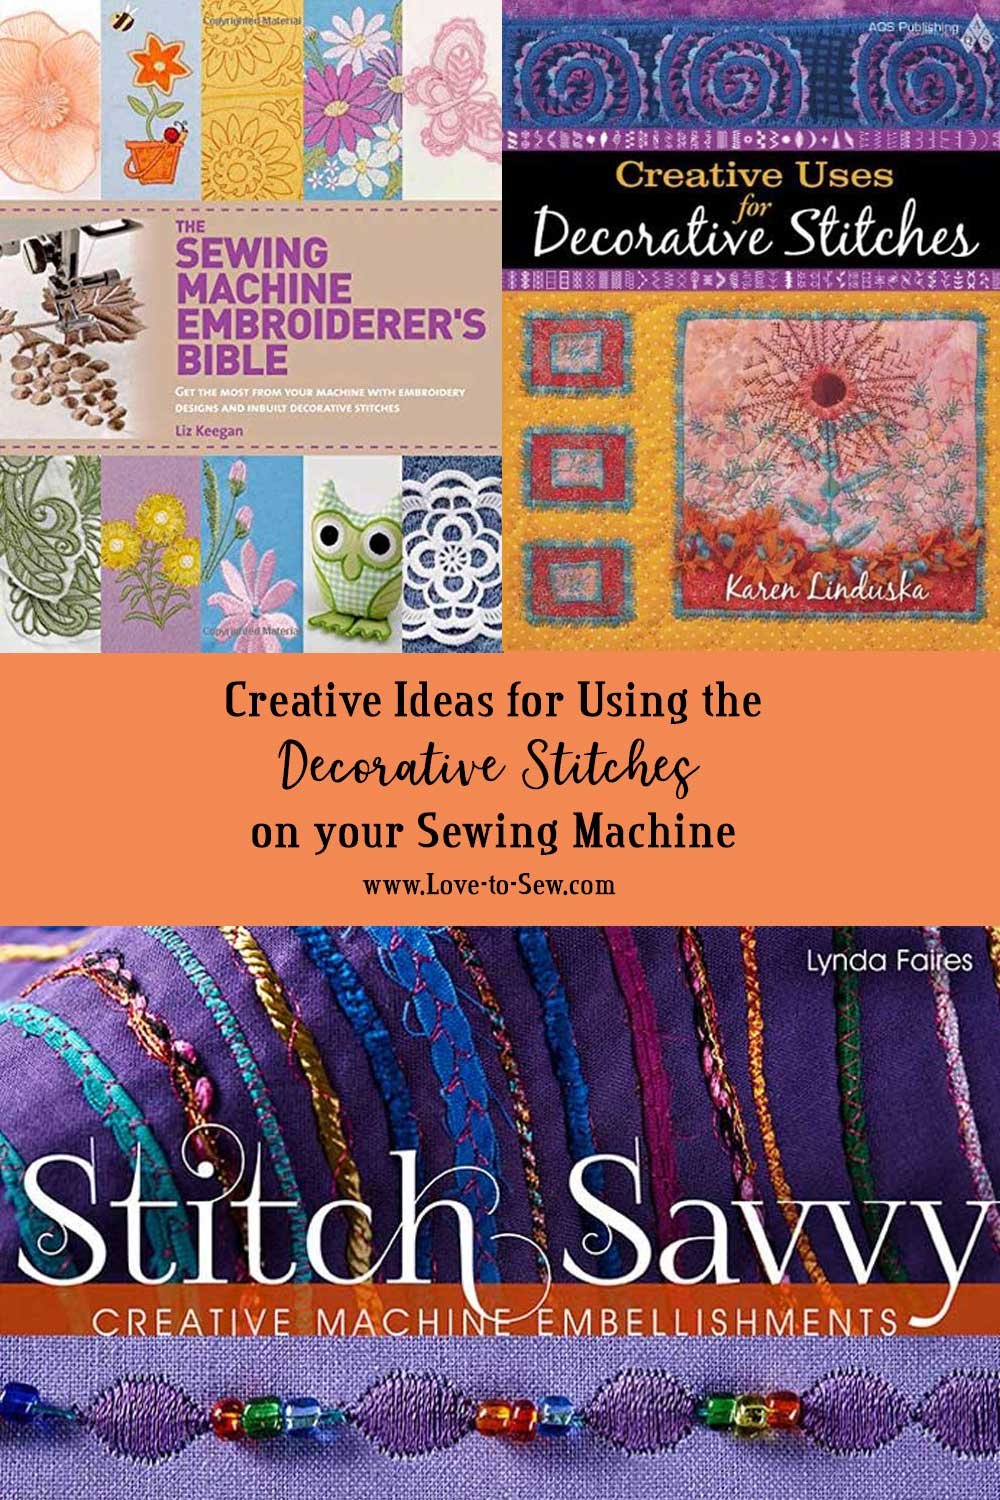 Creative Ideas for Using the Decorative Stitches on your Sewing Machine